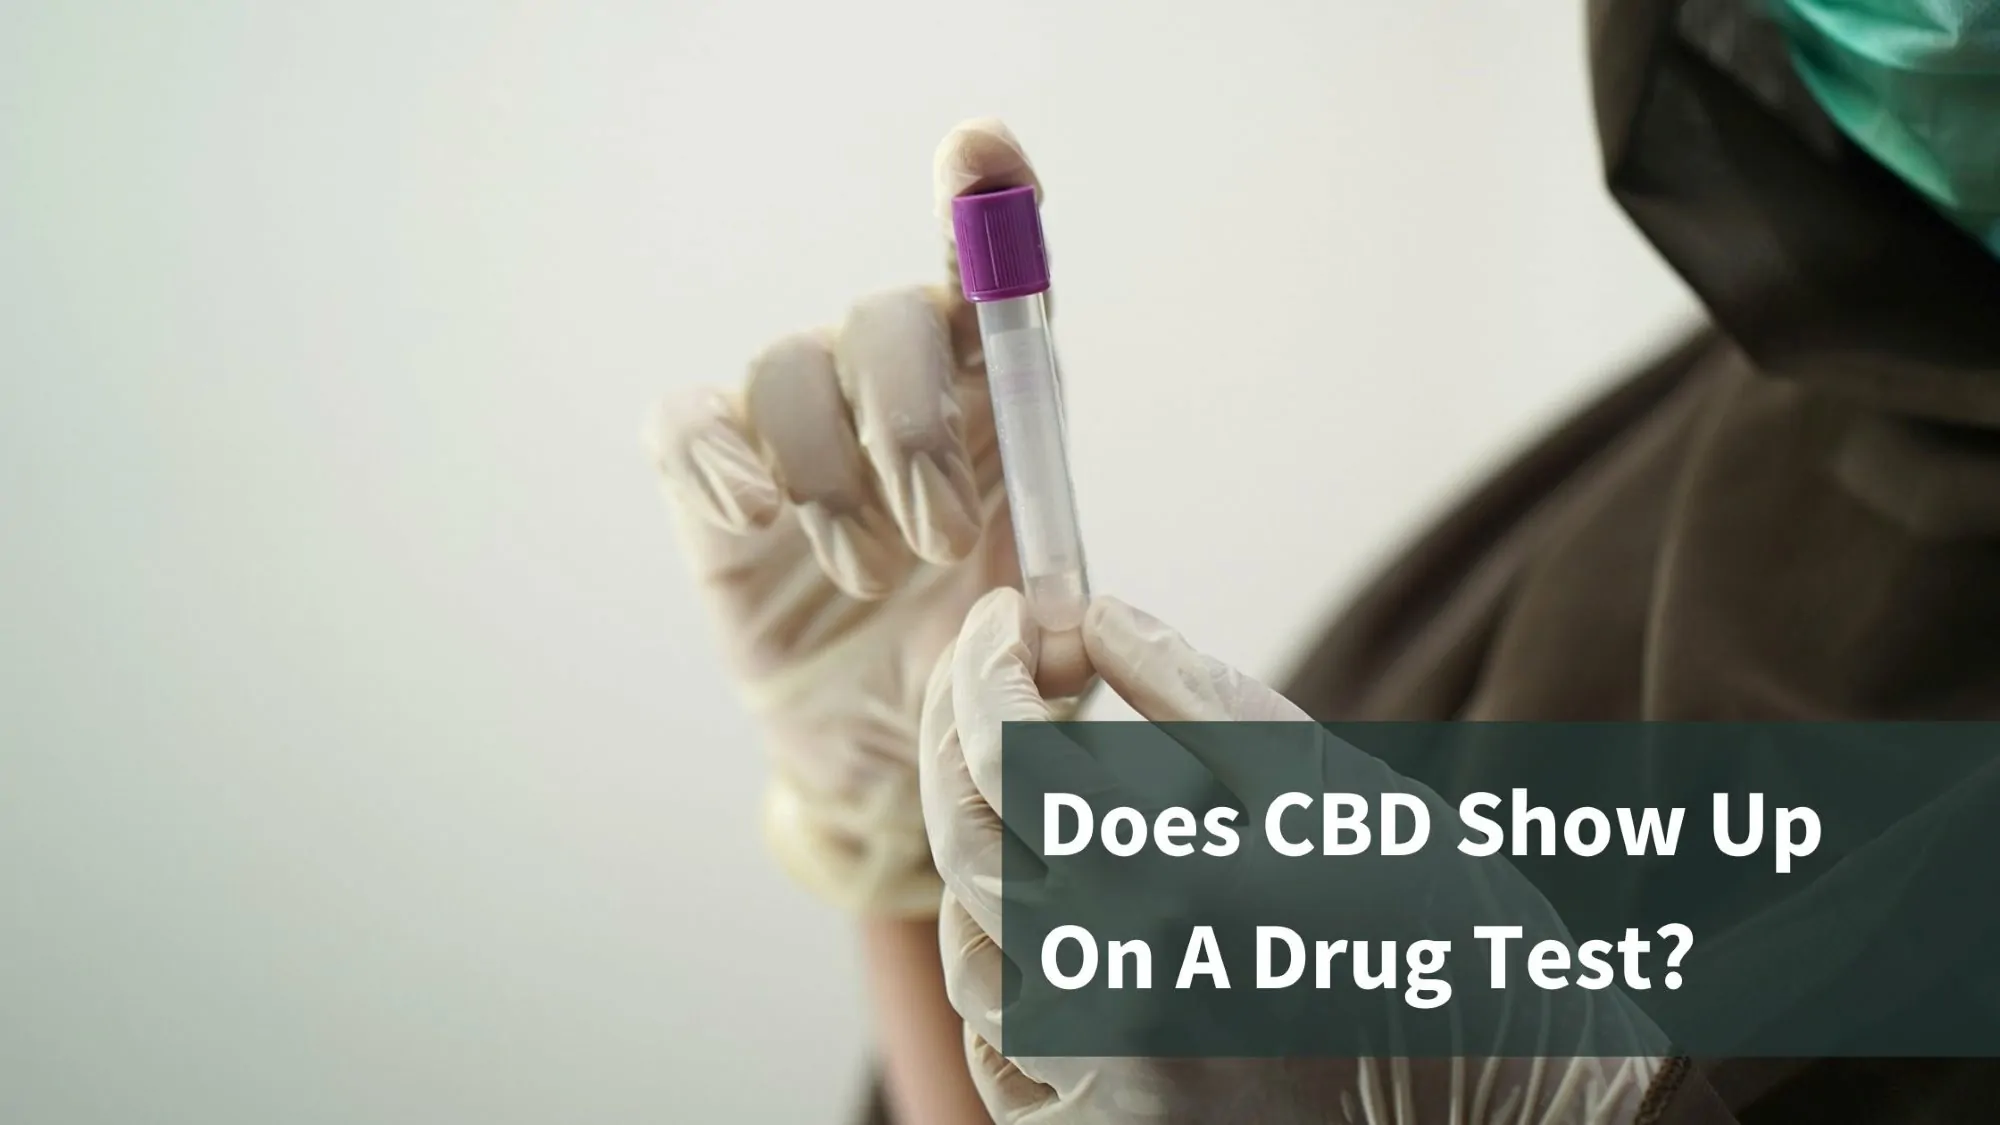 Gloved hands holding a medical vial. Text reads "Does CBD show up on a drug test?"